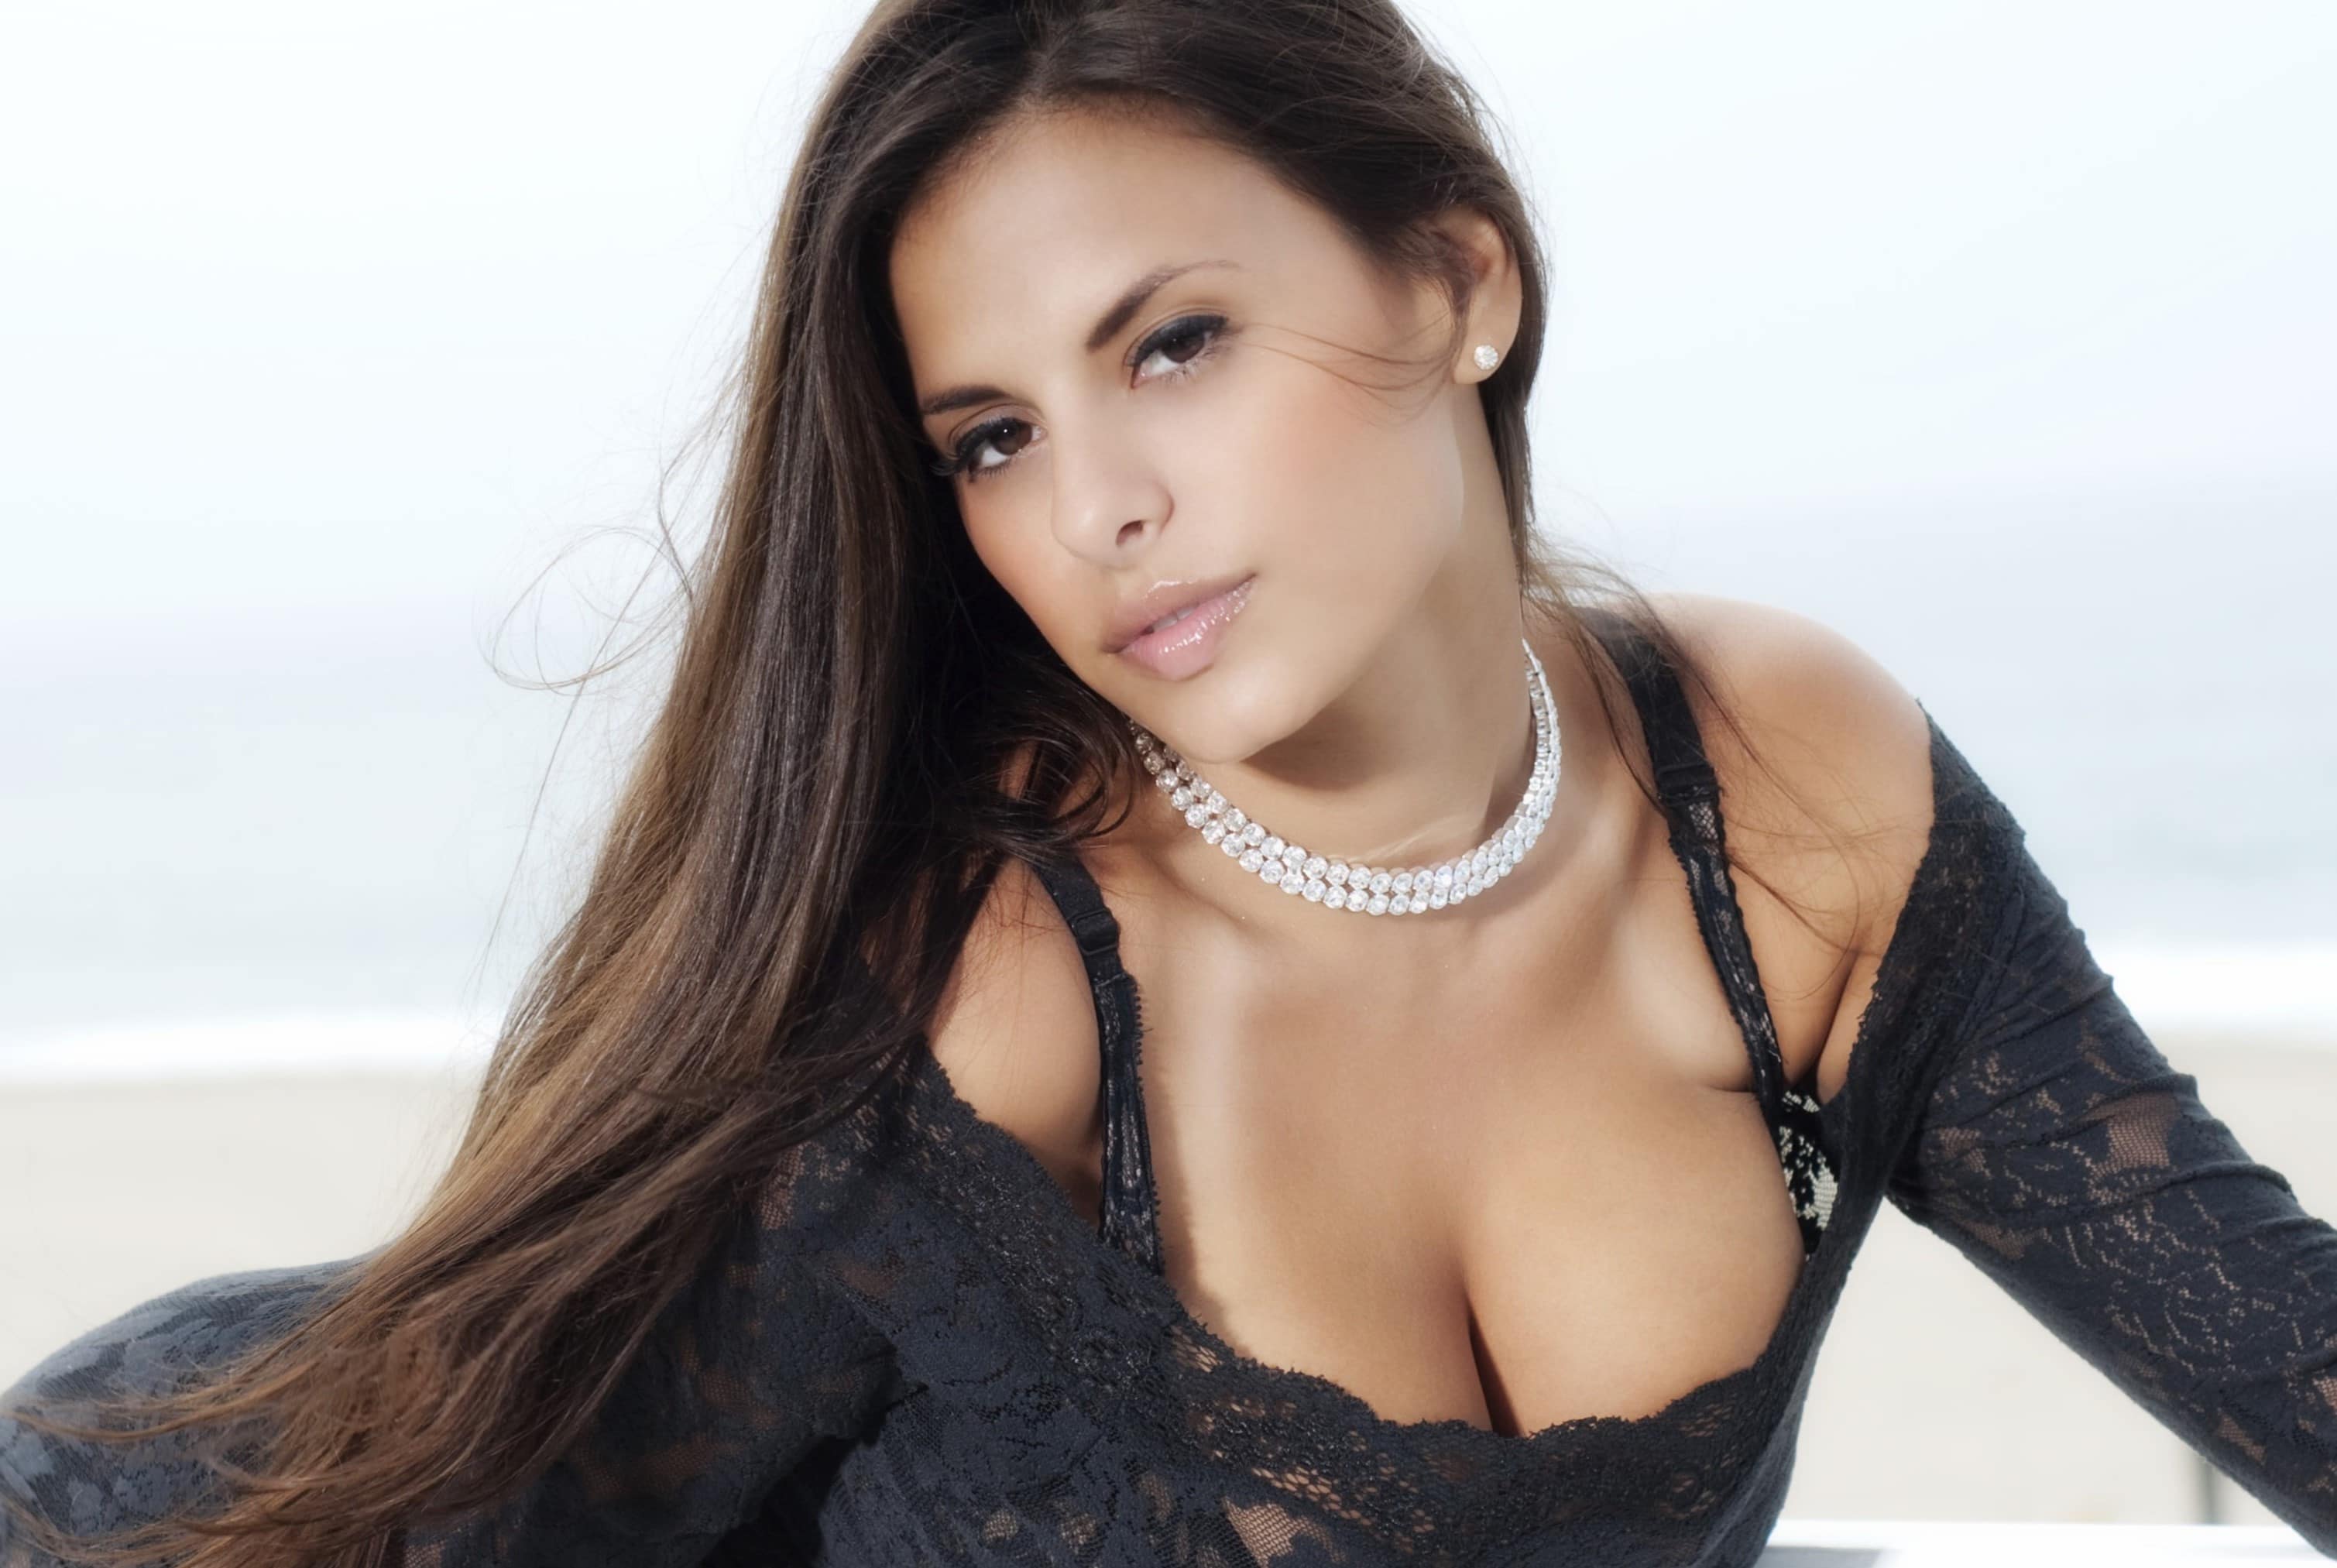 Wendy fiore images